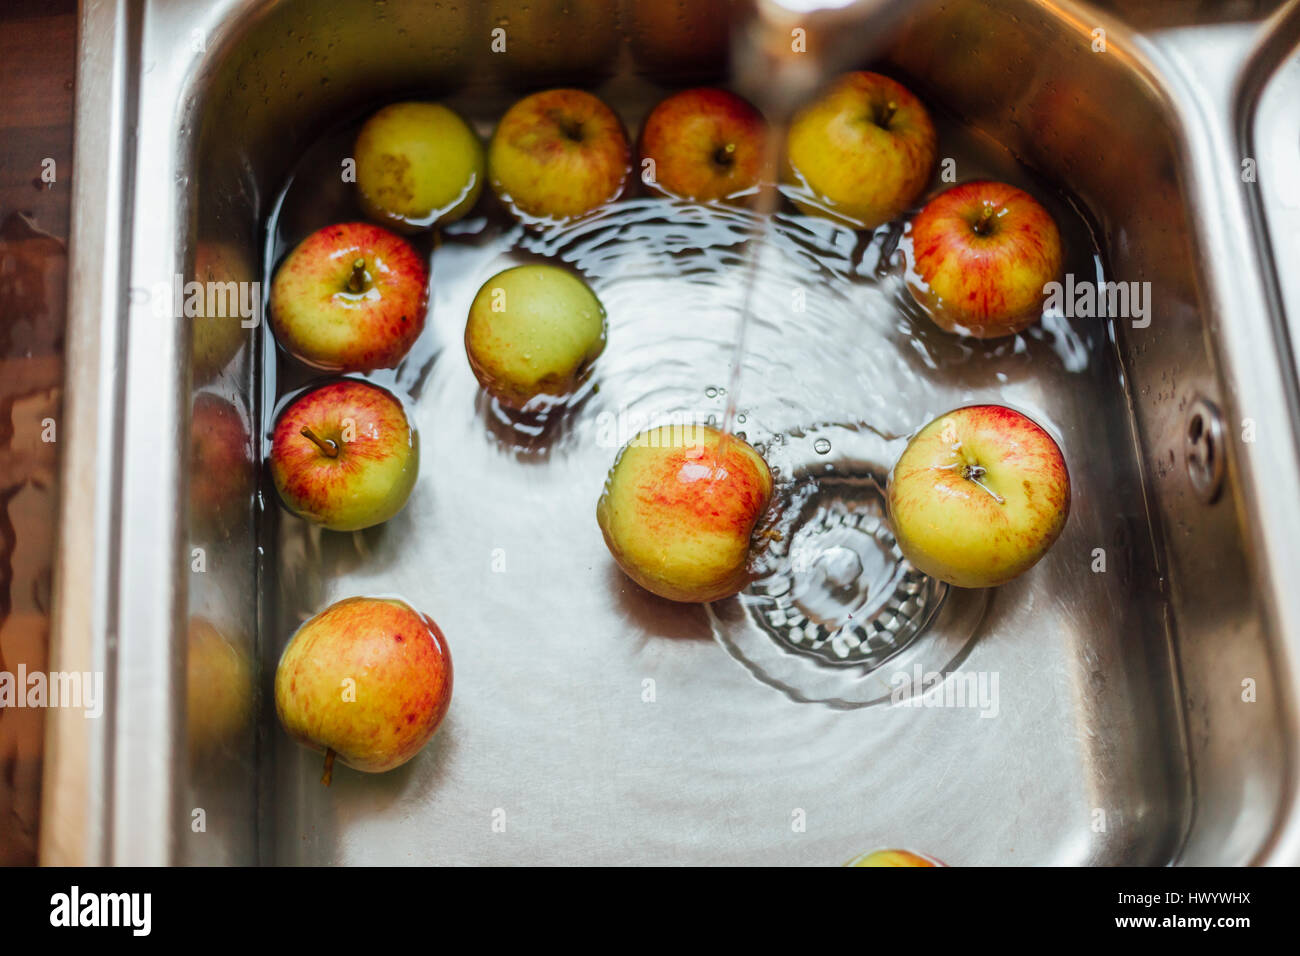 Washing apples in sink Stock Photo